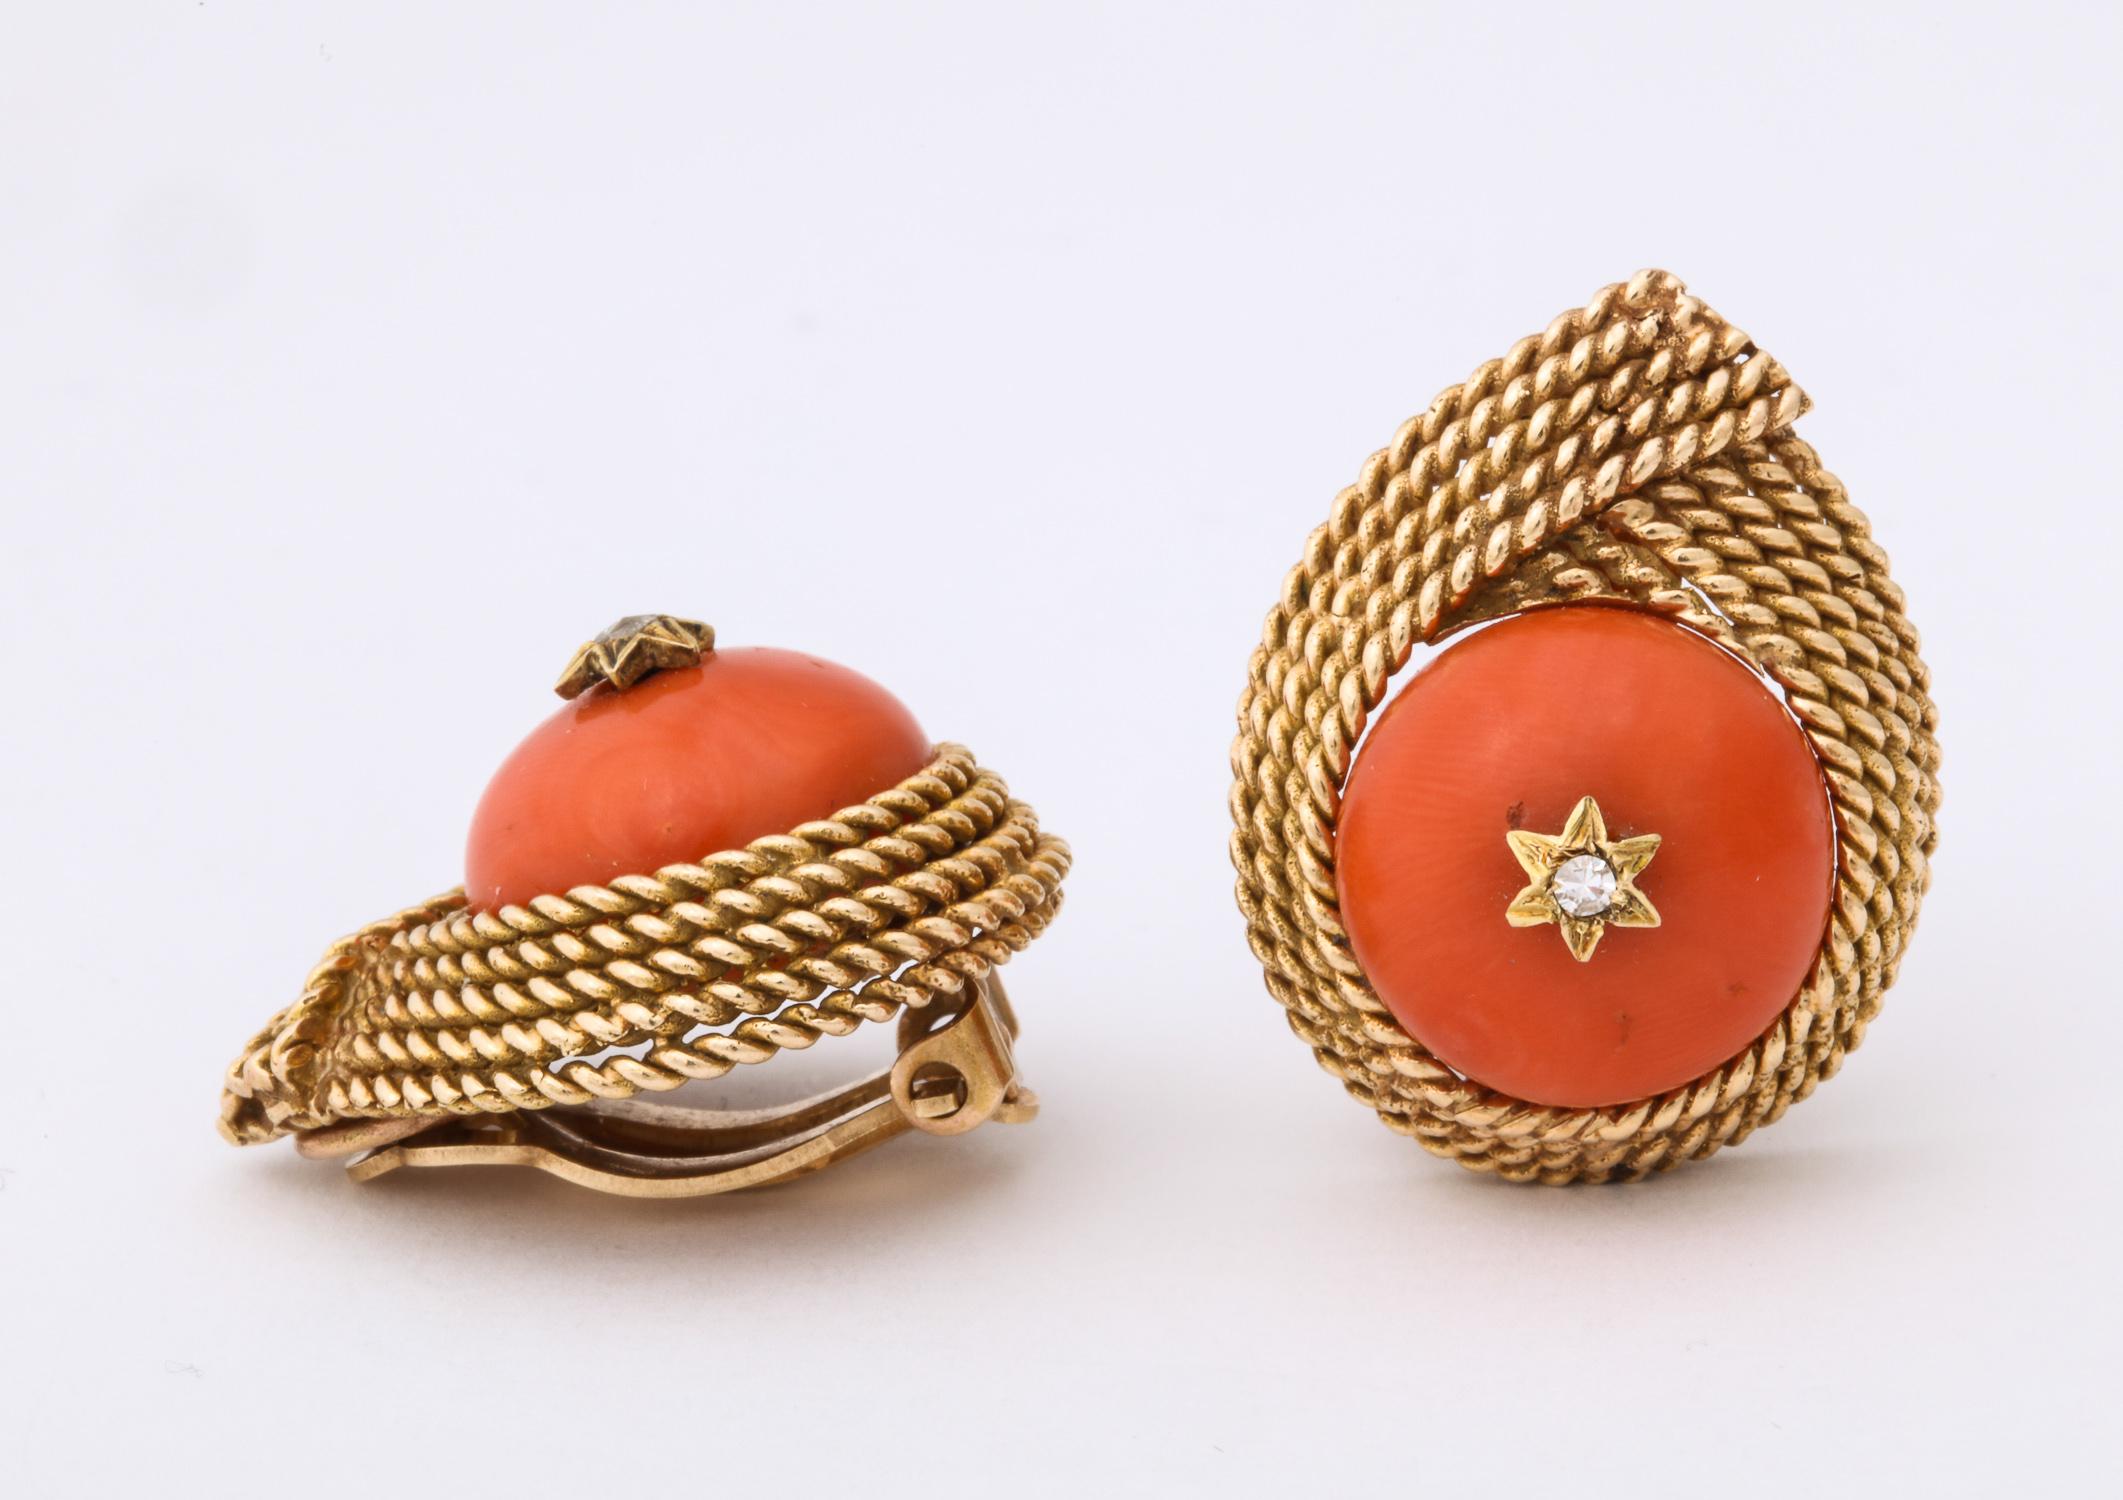 One Ladies 14kt Textured Gold Five Row Rope Design Earclips Centering A 20 MM Coral Cabochon Stone And In Center Of Coral Two Old Cut Diamonds Set In A Star Motif. Clip On Earrings Designed In The 1950's In The United States Of America. NOTE:Posts